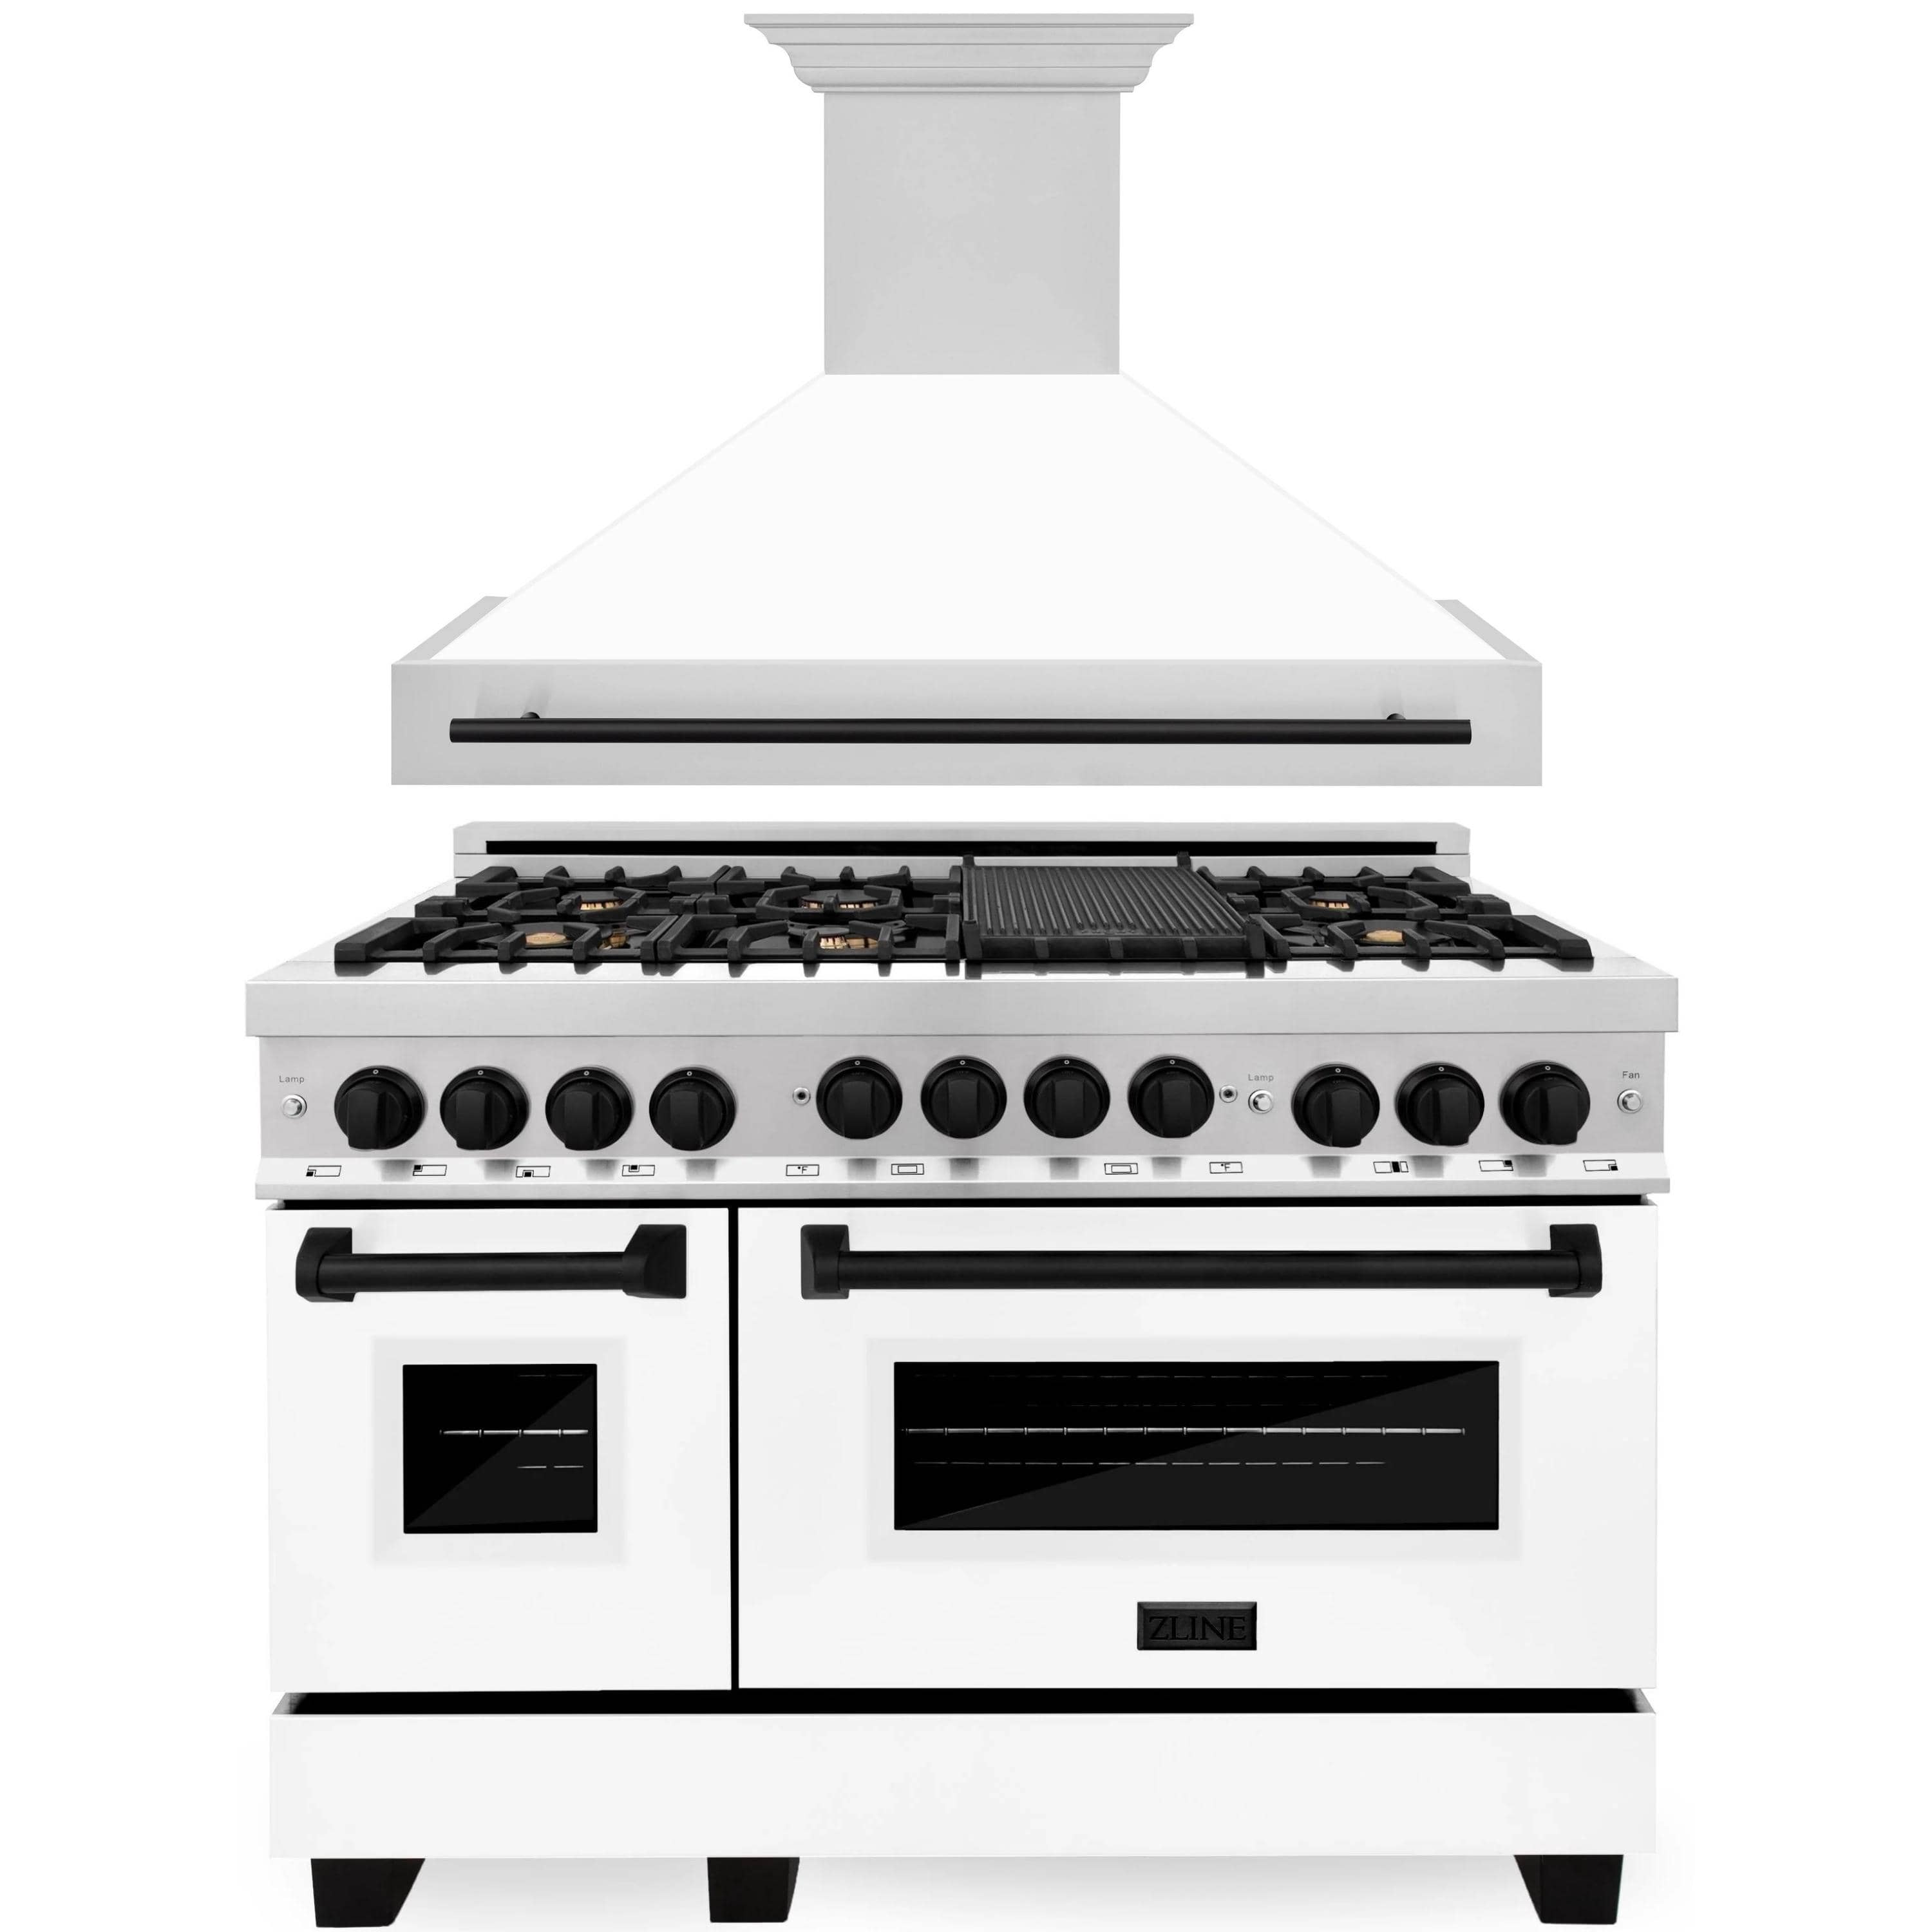 ZLINE Autograph Edition 2-Piece Appliance Package - 48-Inch Gas Range & Wall Mounted Range Hood in Stainless Steel and White Door with Matte Black Trim (2AKPR-RGWMRH48-MB)